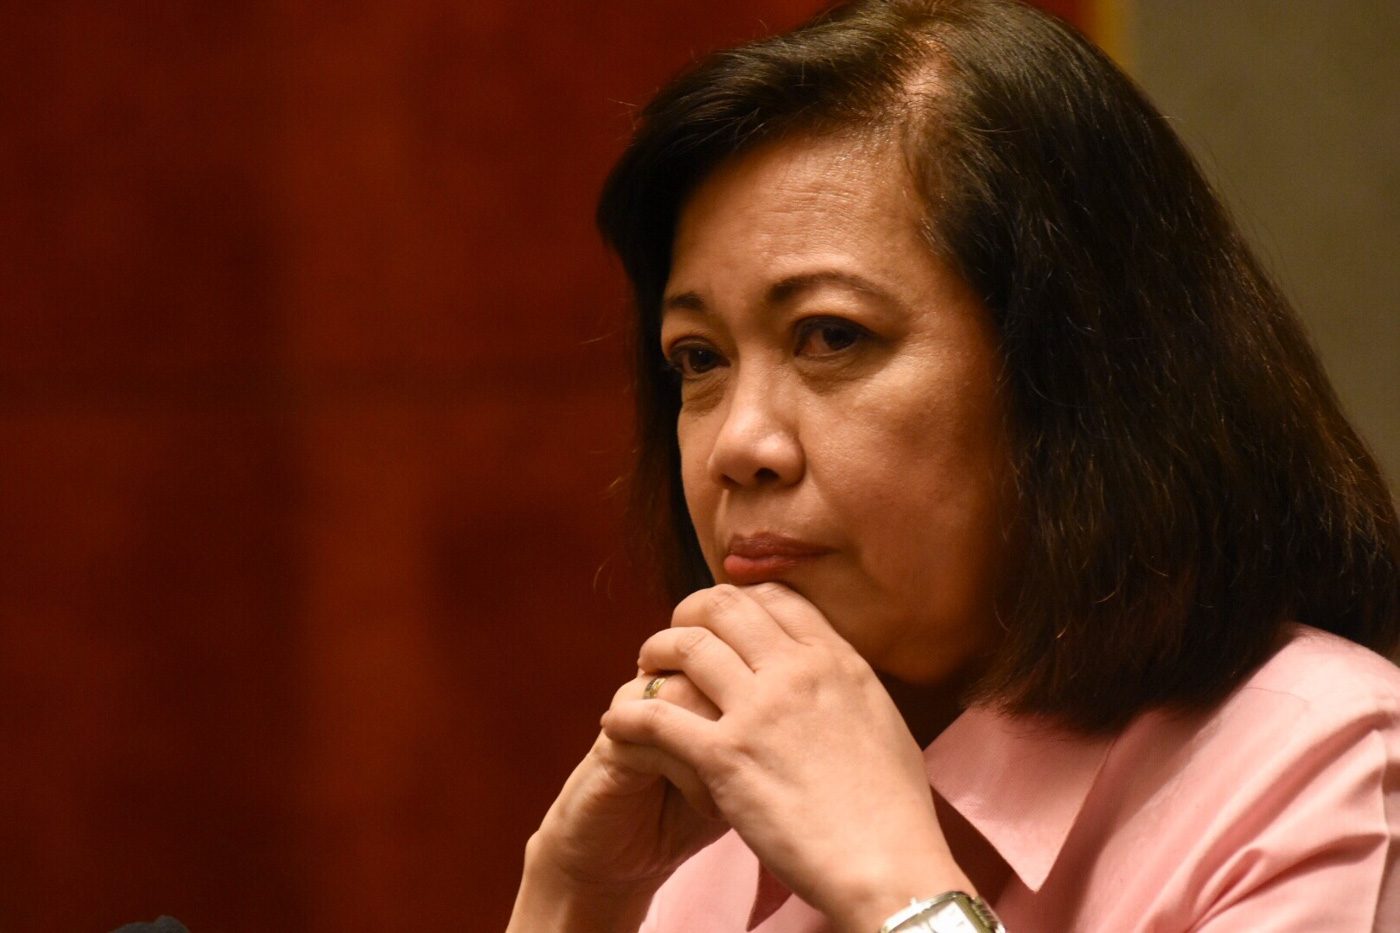 Sereno says there were offers to meet Duterte: He could have ended it